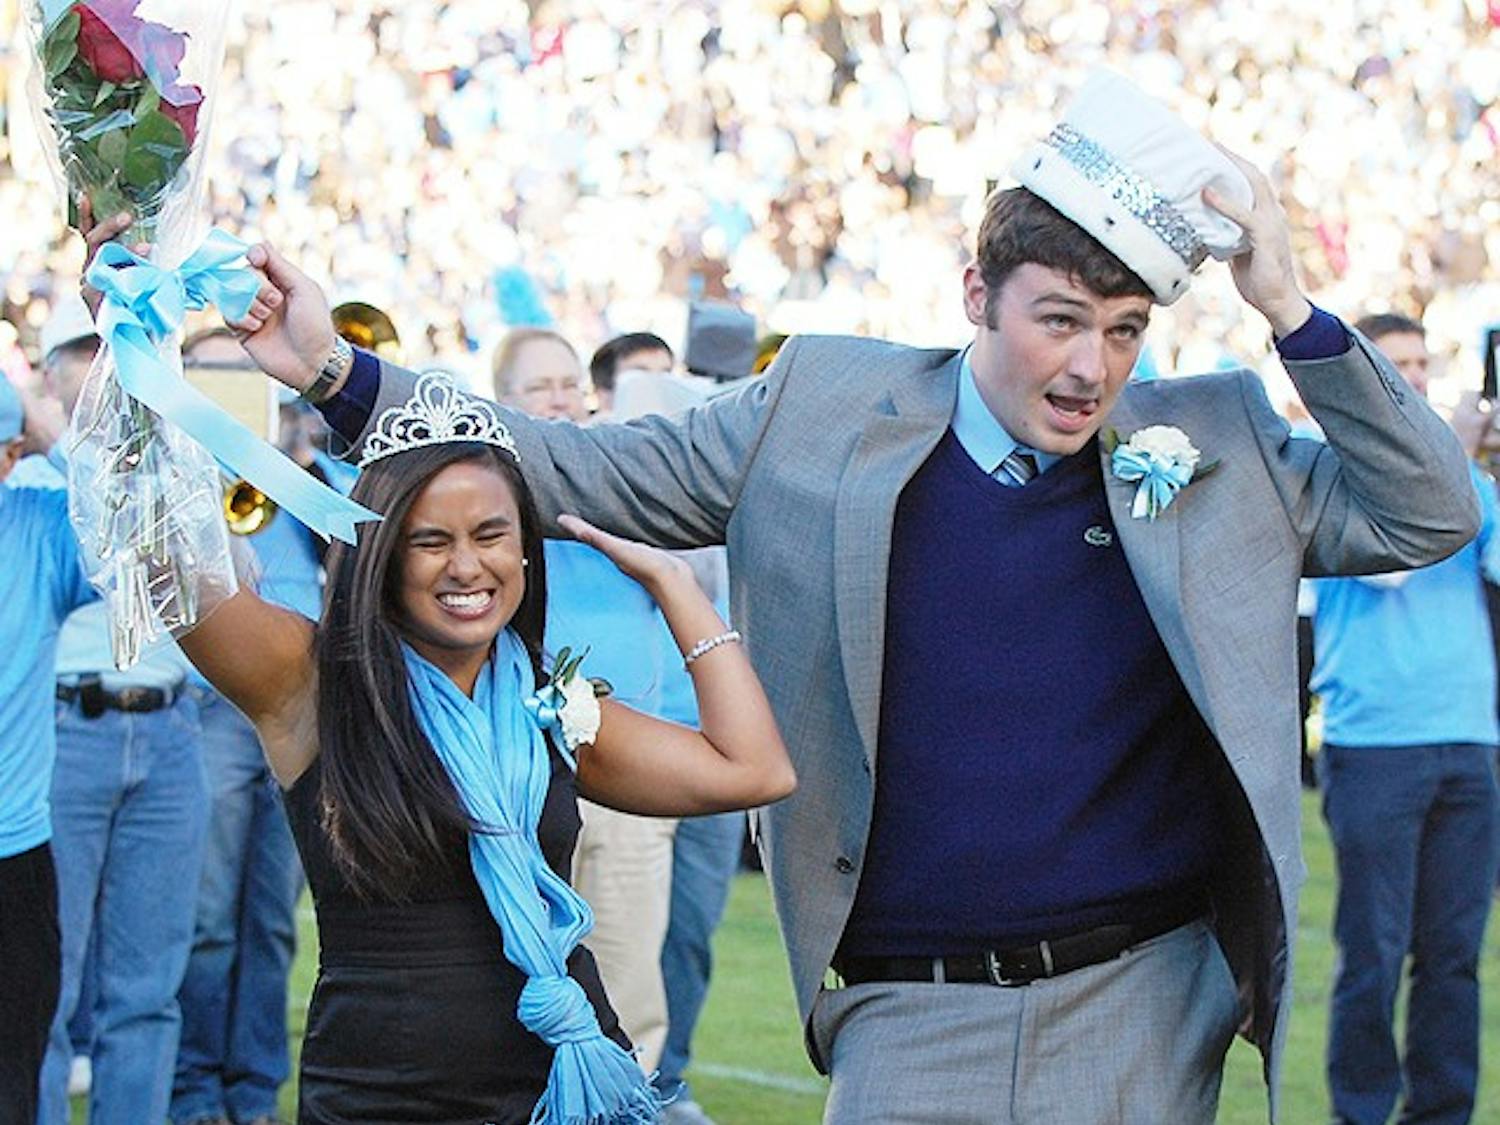 UNC football homecoming game vs. Wake Forest. Holly Roberts, english and pyschology major, and Clint Hannah, journalism and sports administration major, celebrate their victory as mr. and miss. UNC